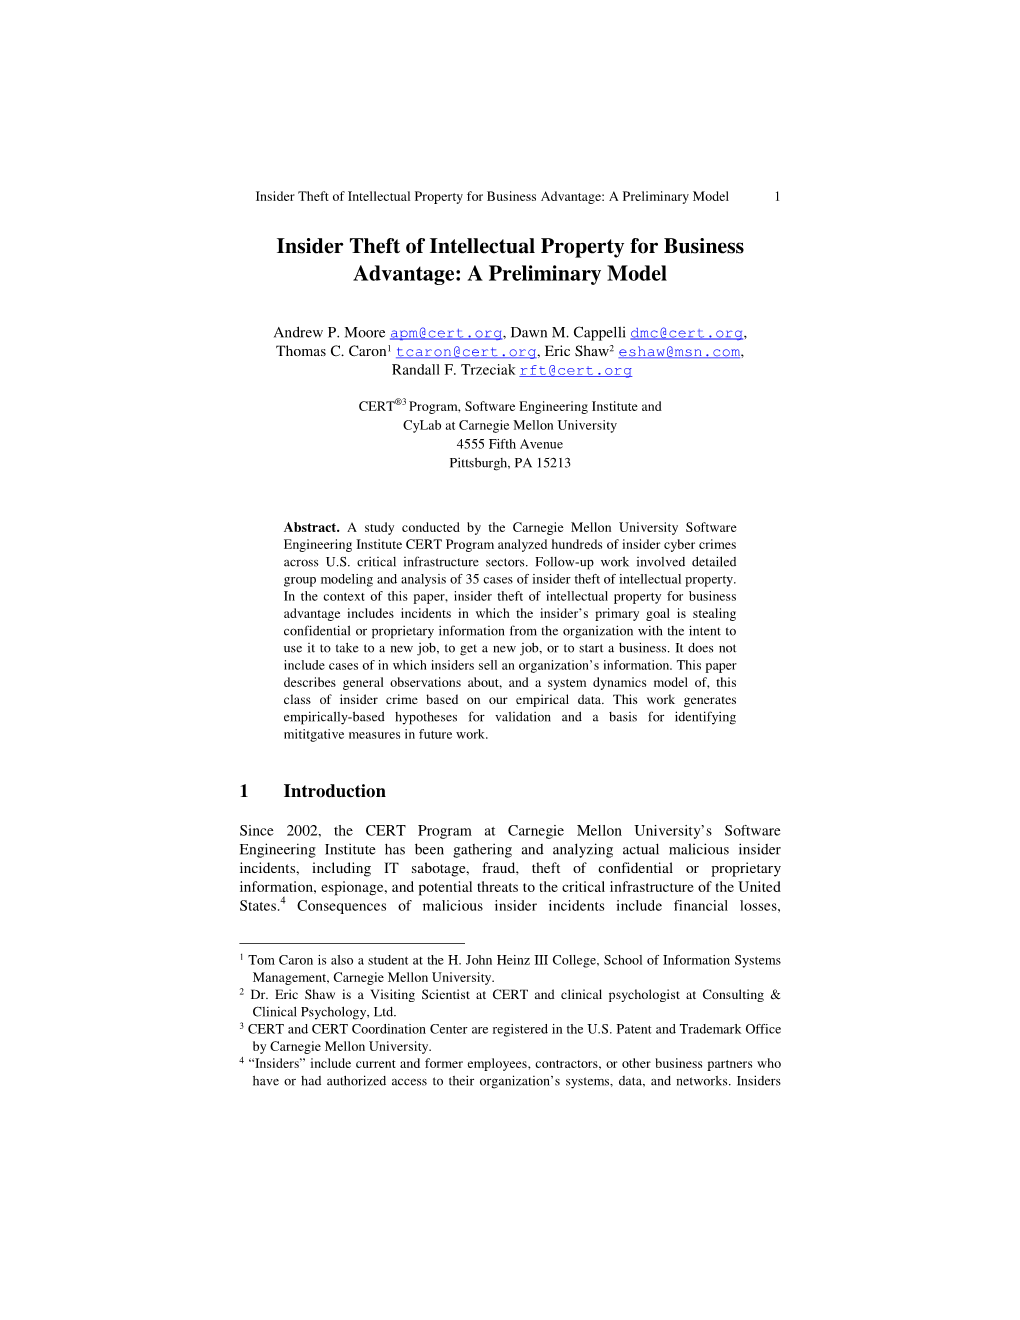 Insider Theft of Intellectual Property for Business Advantage: a Preliminary Model 1